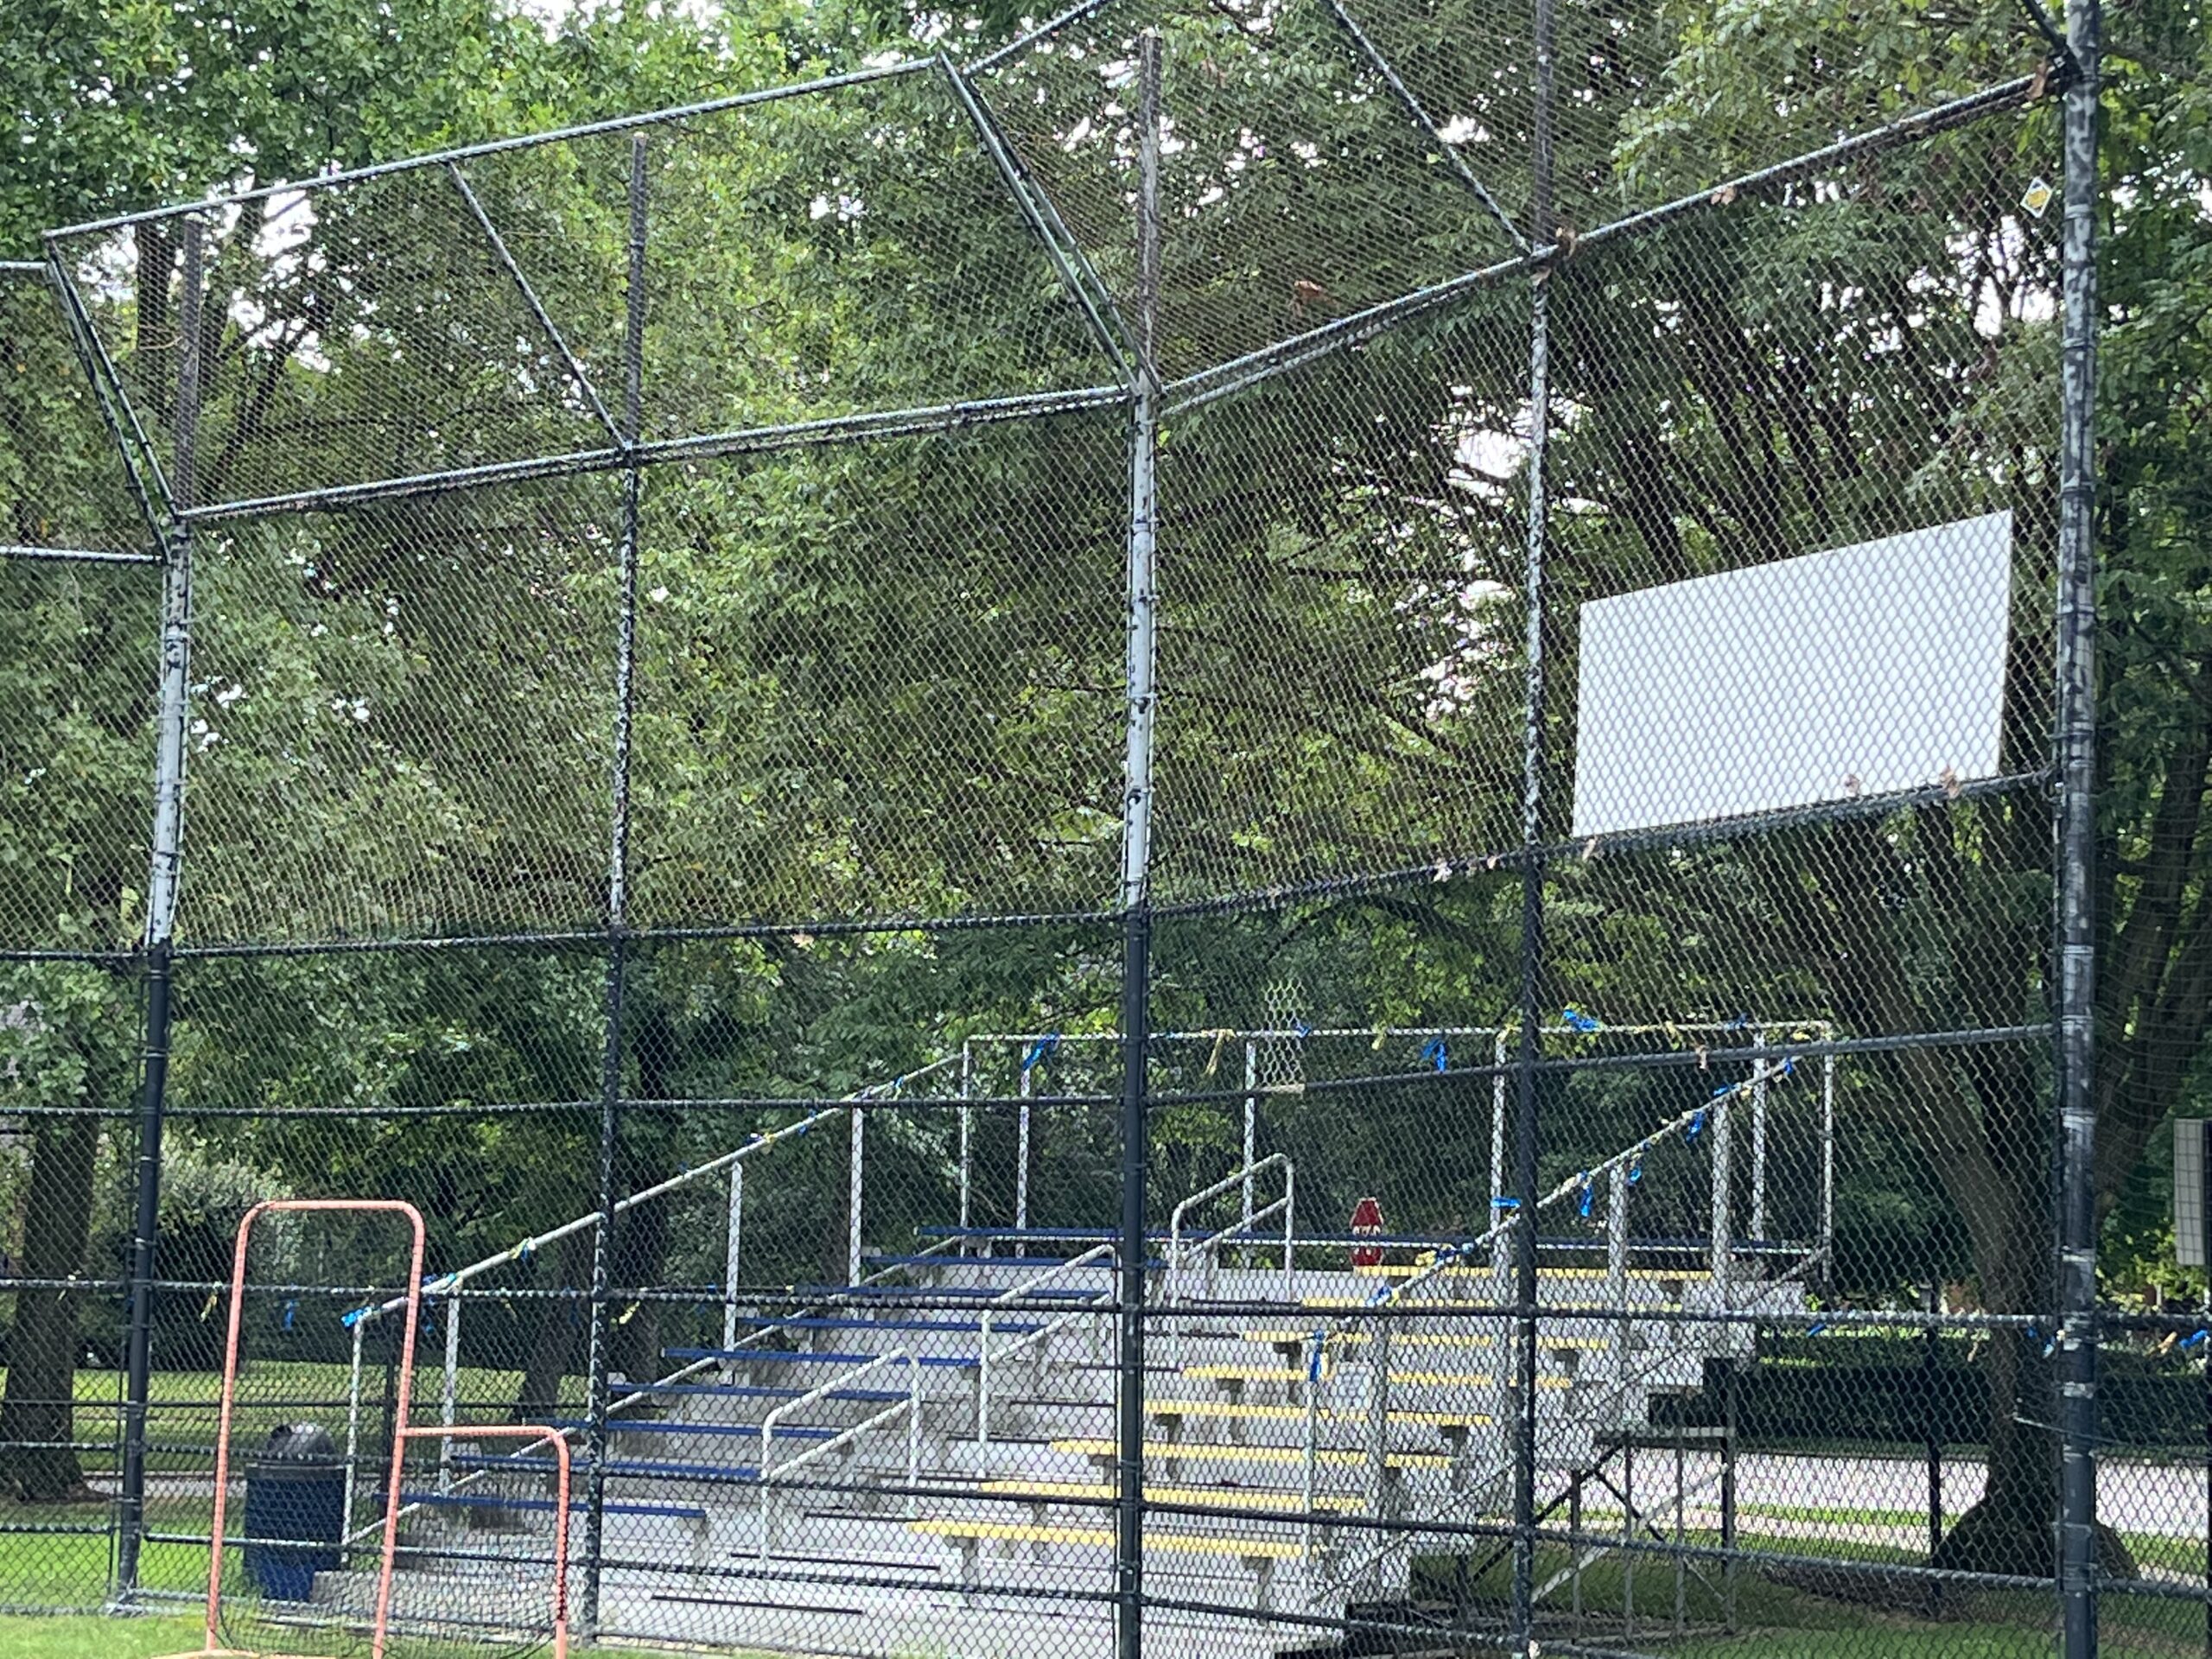 Old bleachers fencing at OHS baseball fields